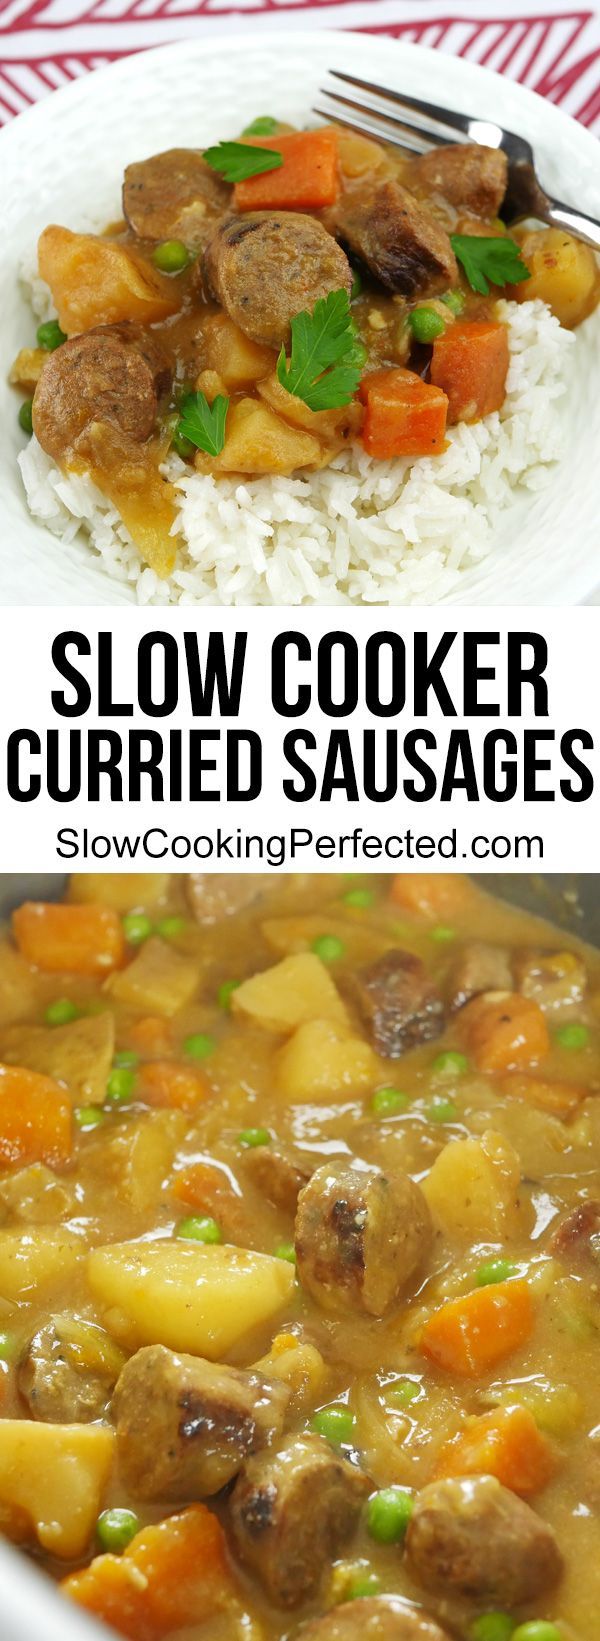 Slow Cooker Curried Sausages -   22 sausage recipes slow cooker
 ideas